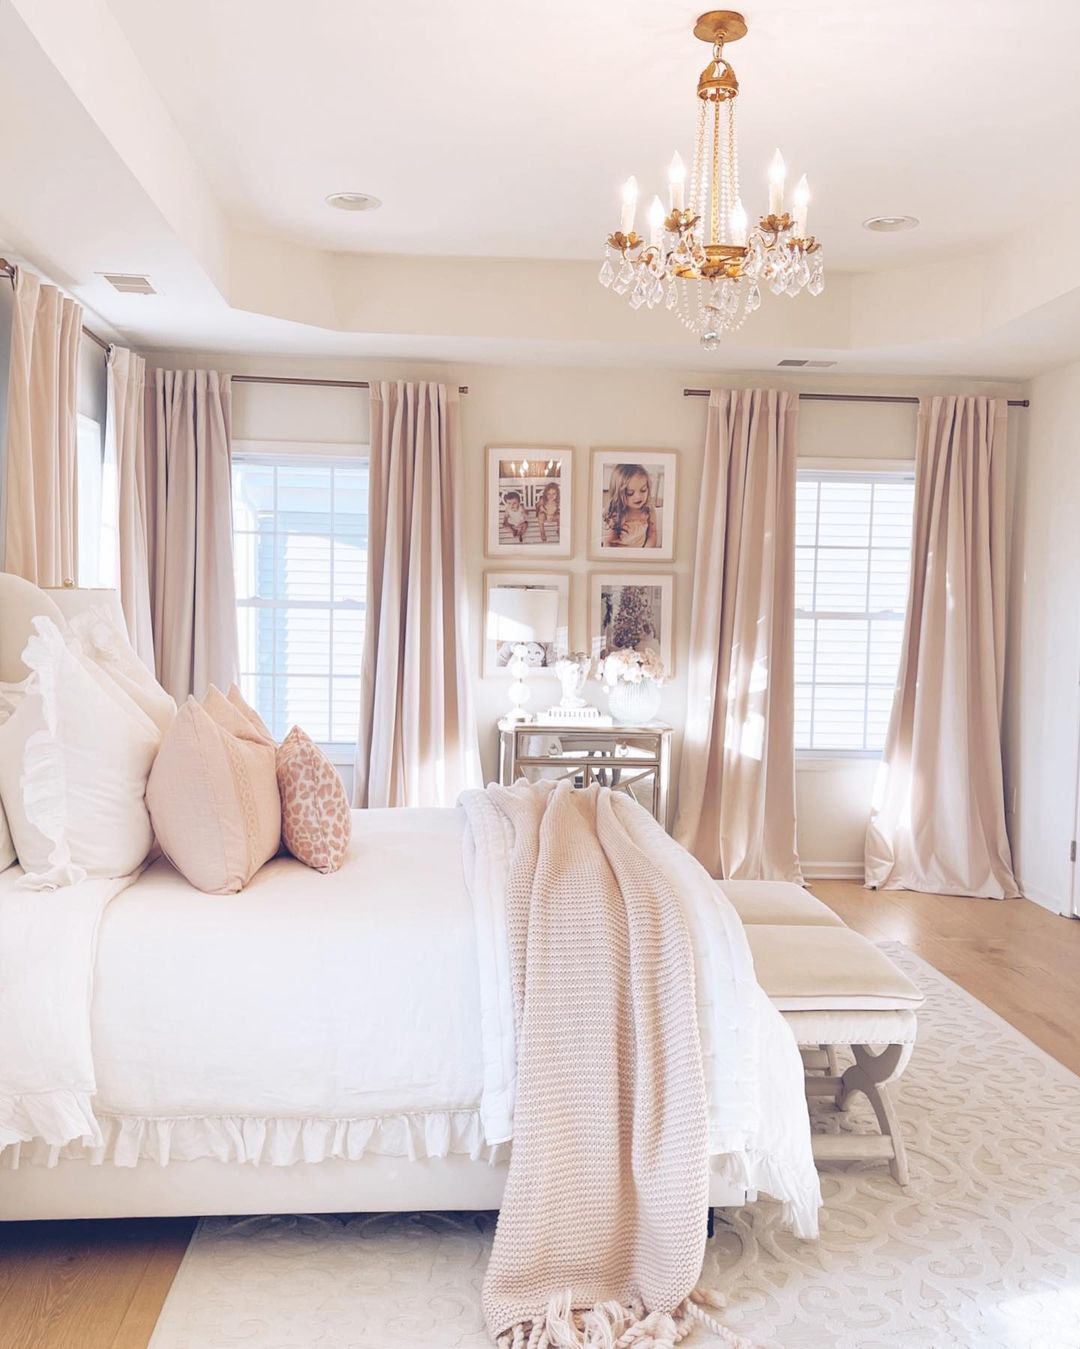 Soft pink bedroom with gold chandelier. Photo by Instagram User @the.pink.dream